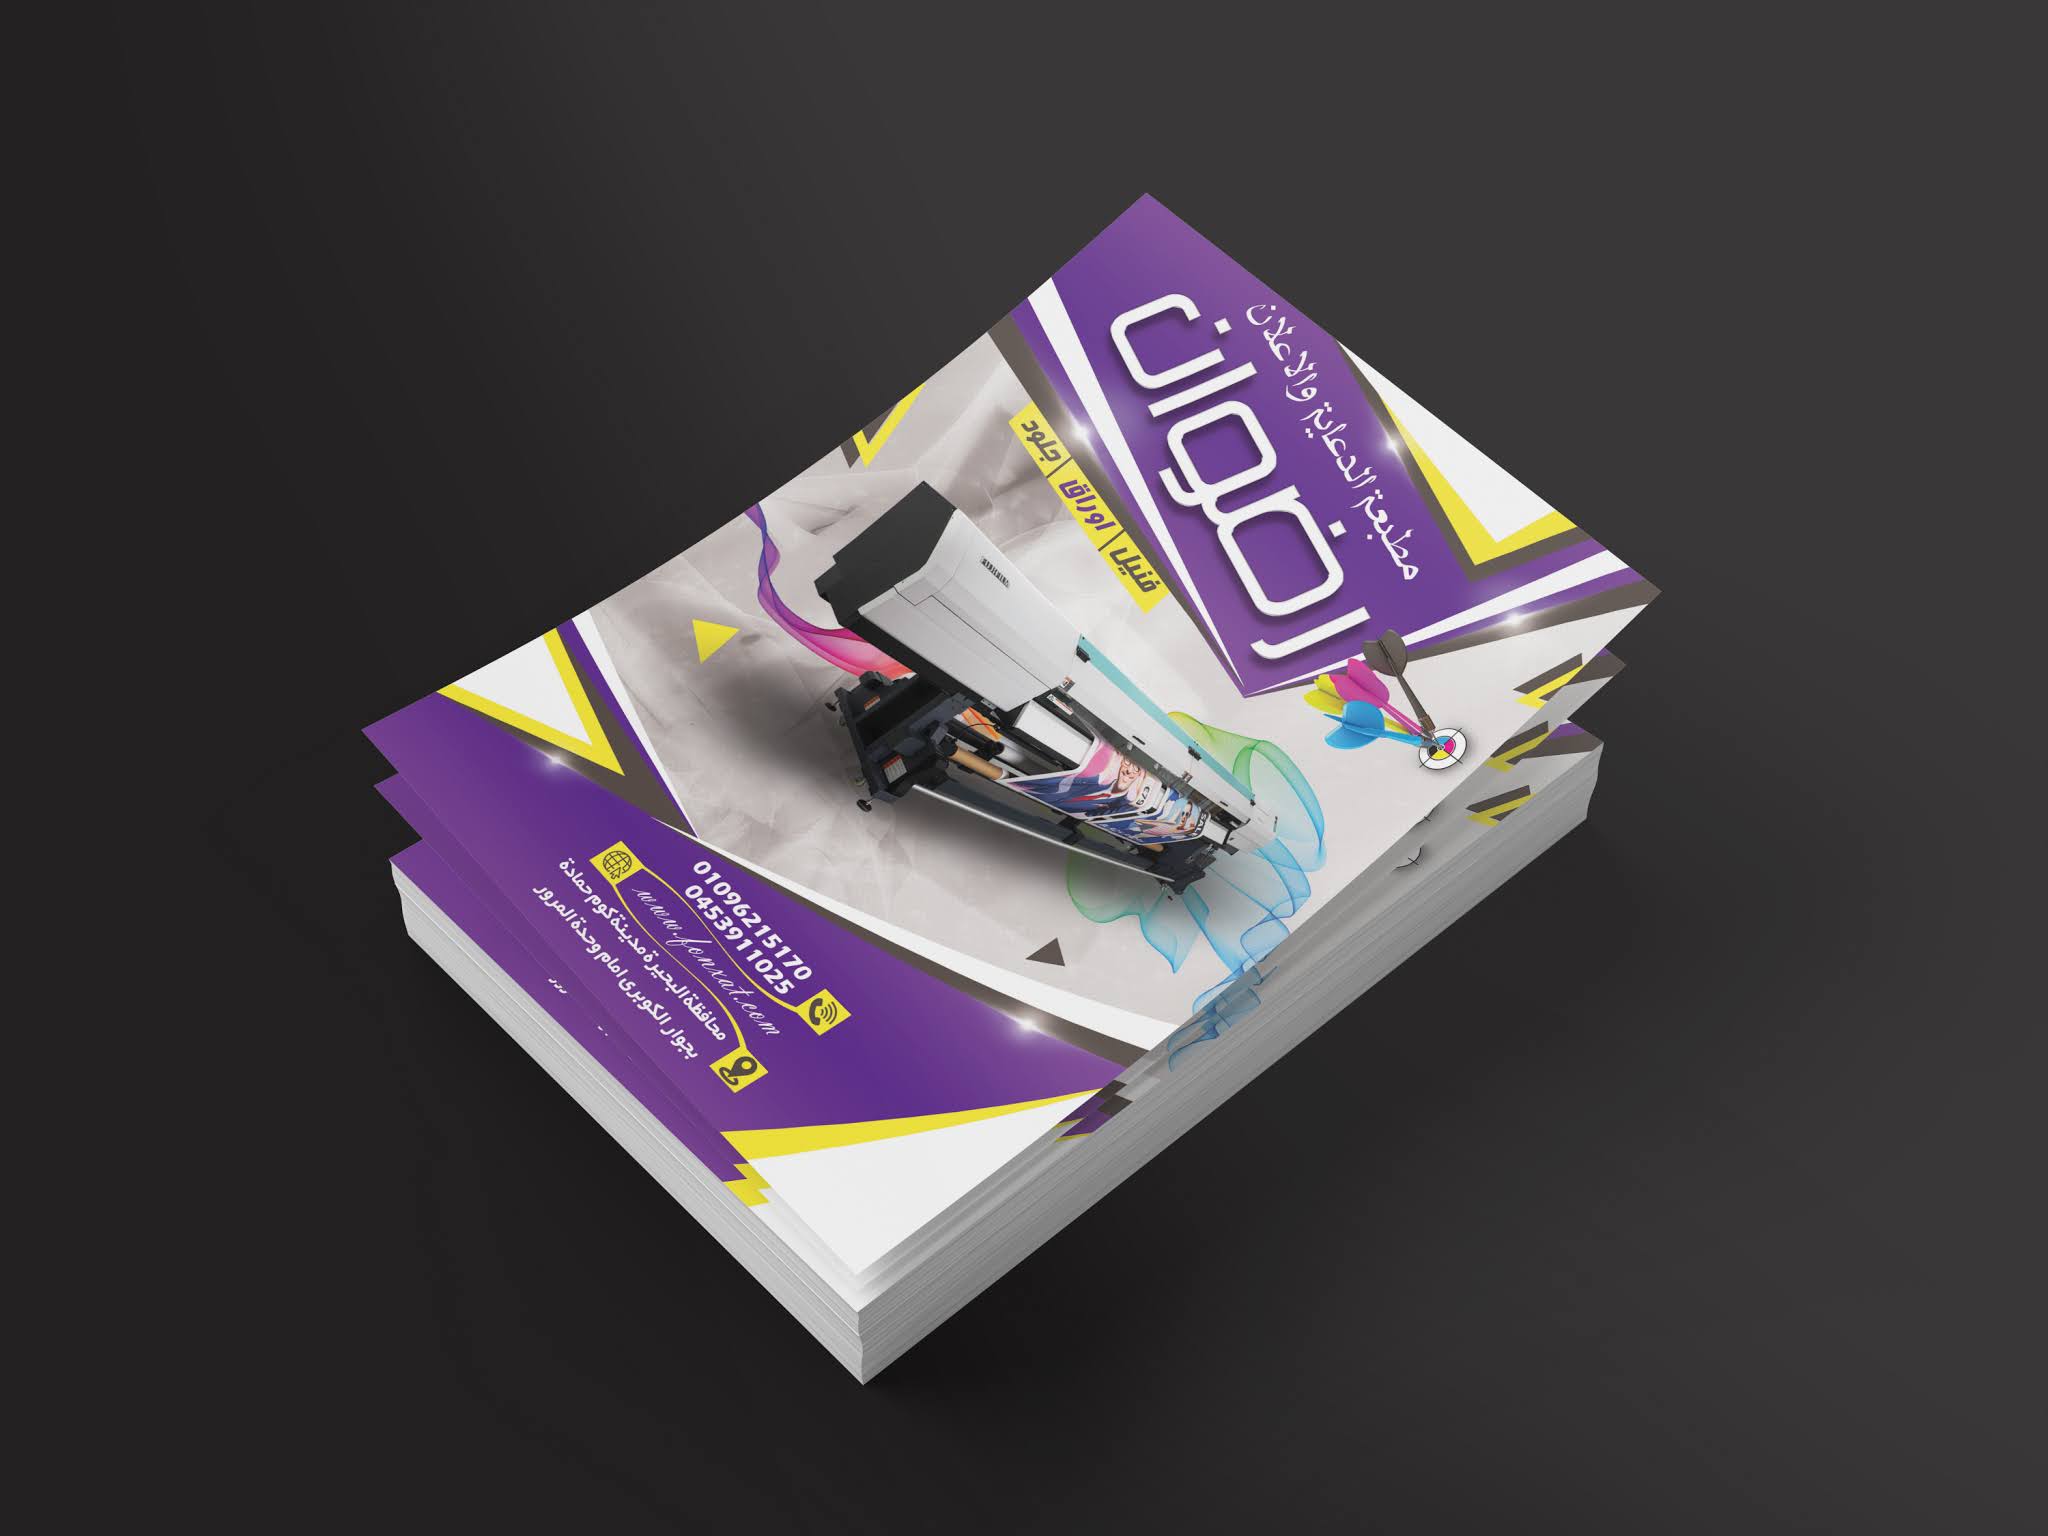 Free download flyer or open source psd poster for printing and advertising companies